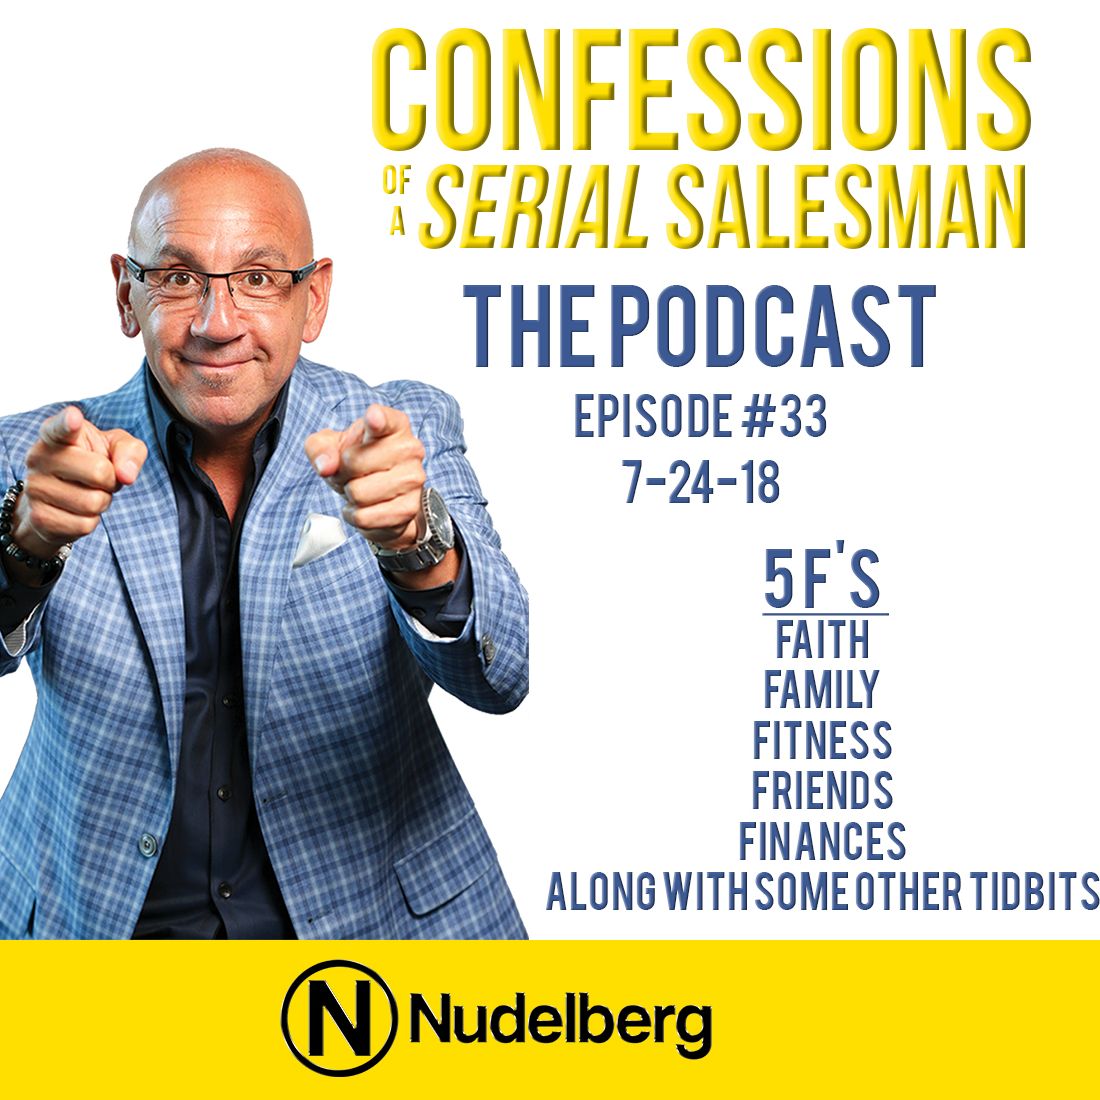 Confessions of a Serial Salesman The Podcast with Steve Nudelberg